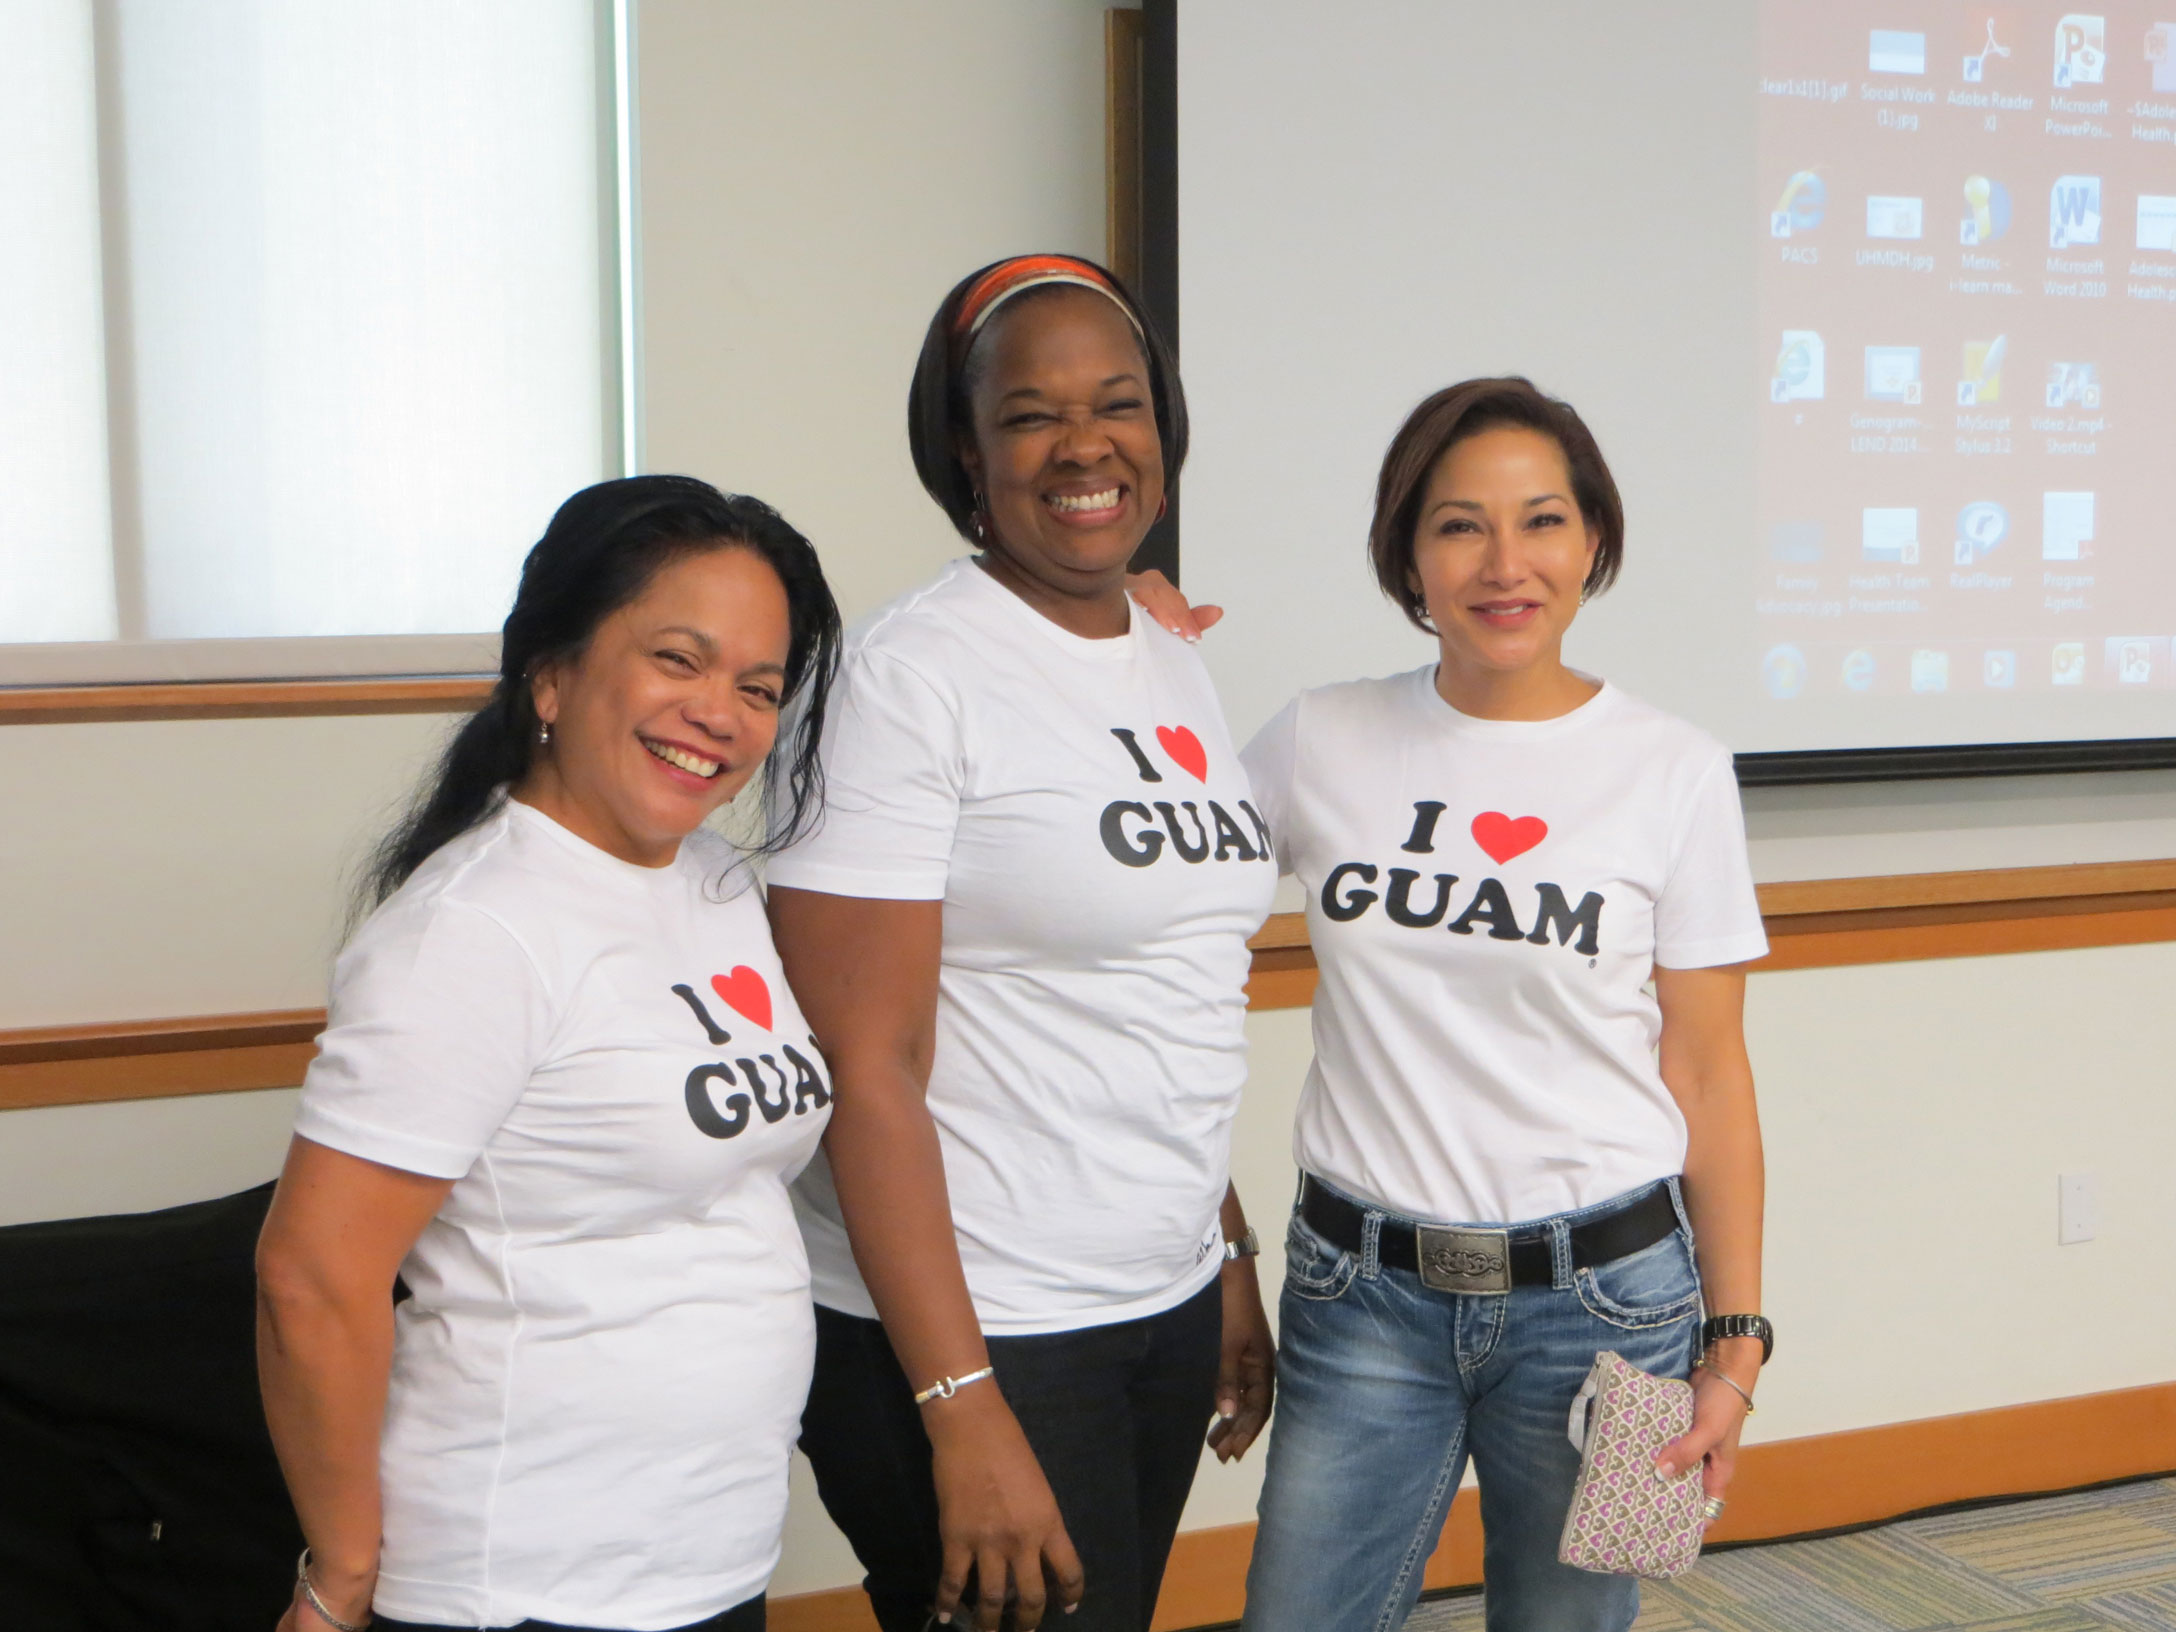 Photo of LEND Trainees conducting a presentation while wearing "I Love Guam" t-shirts.